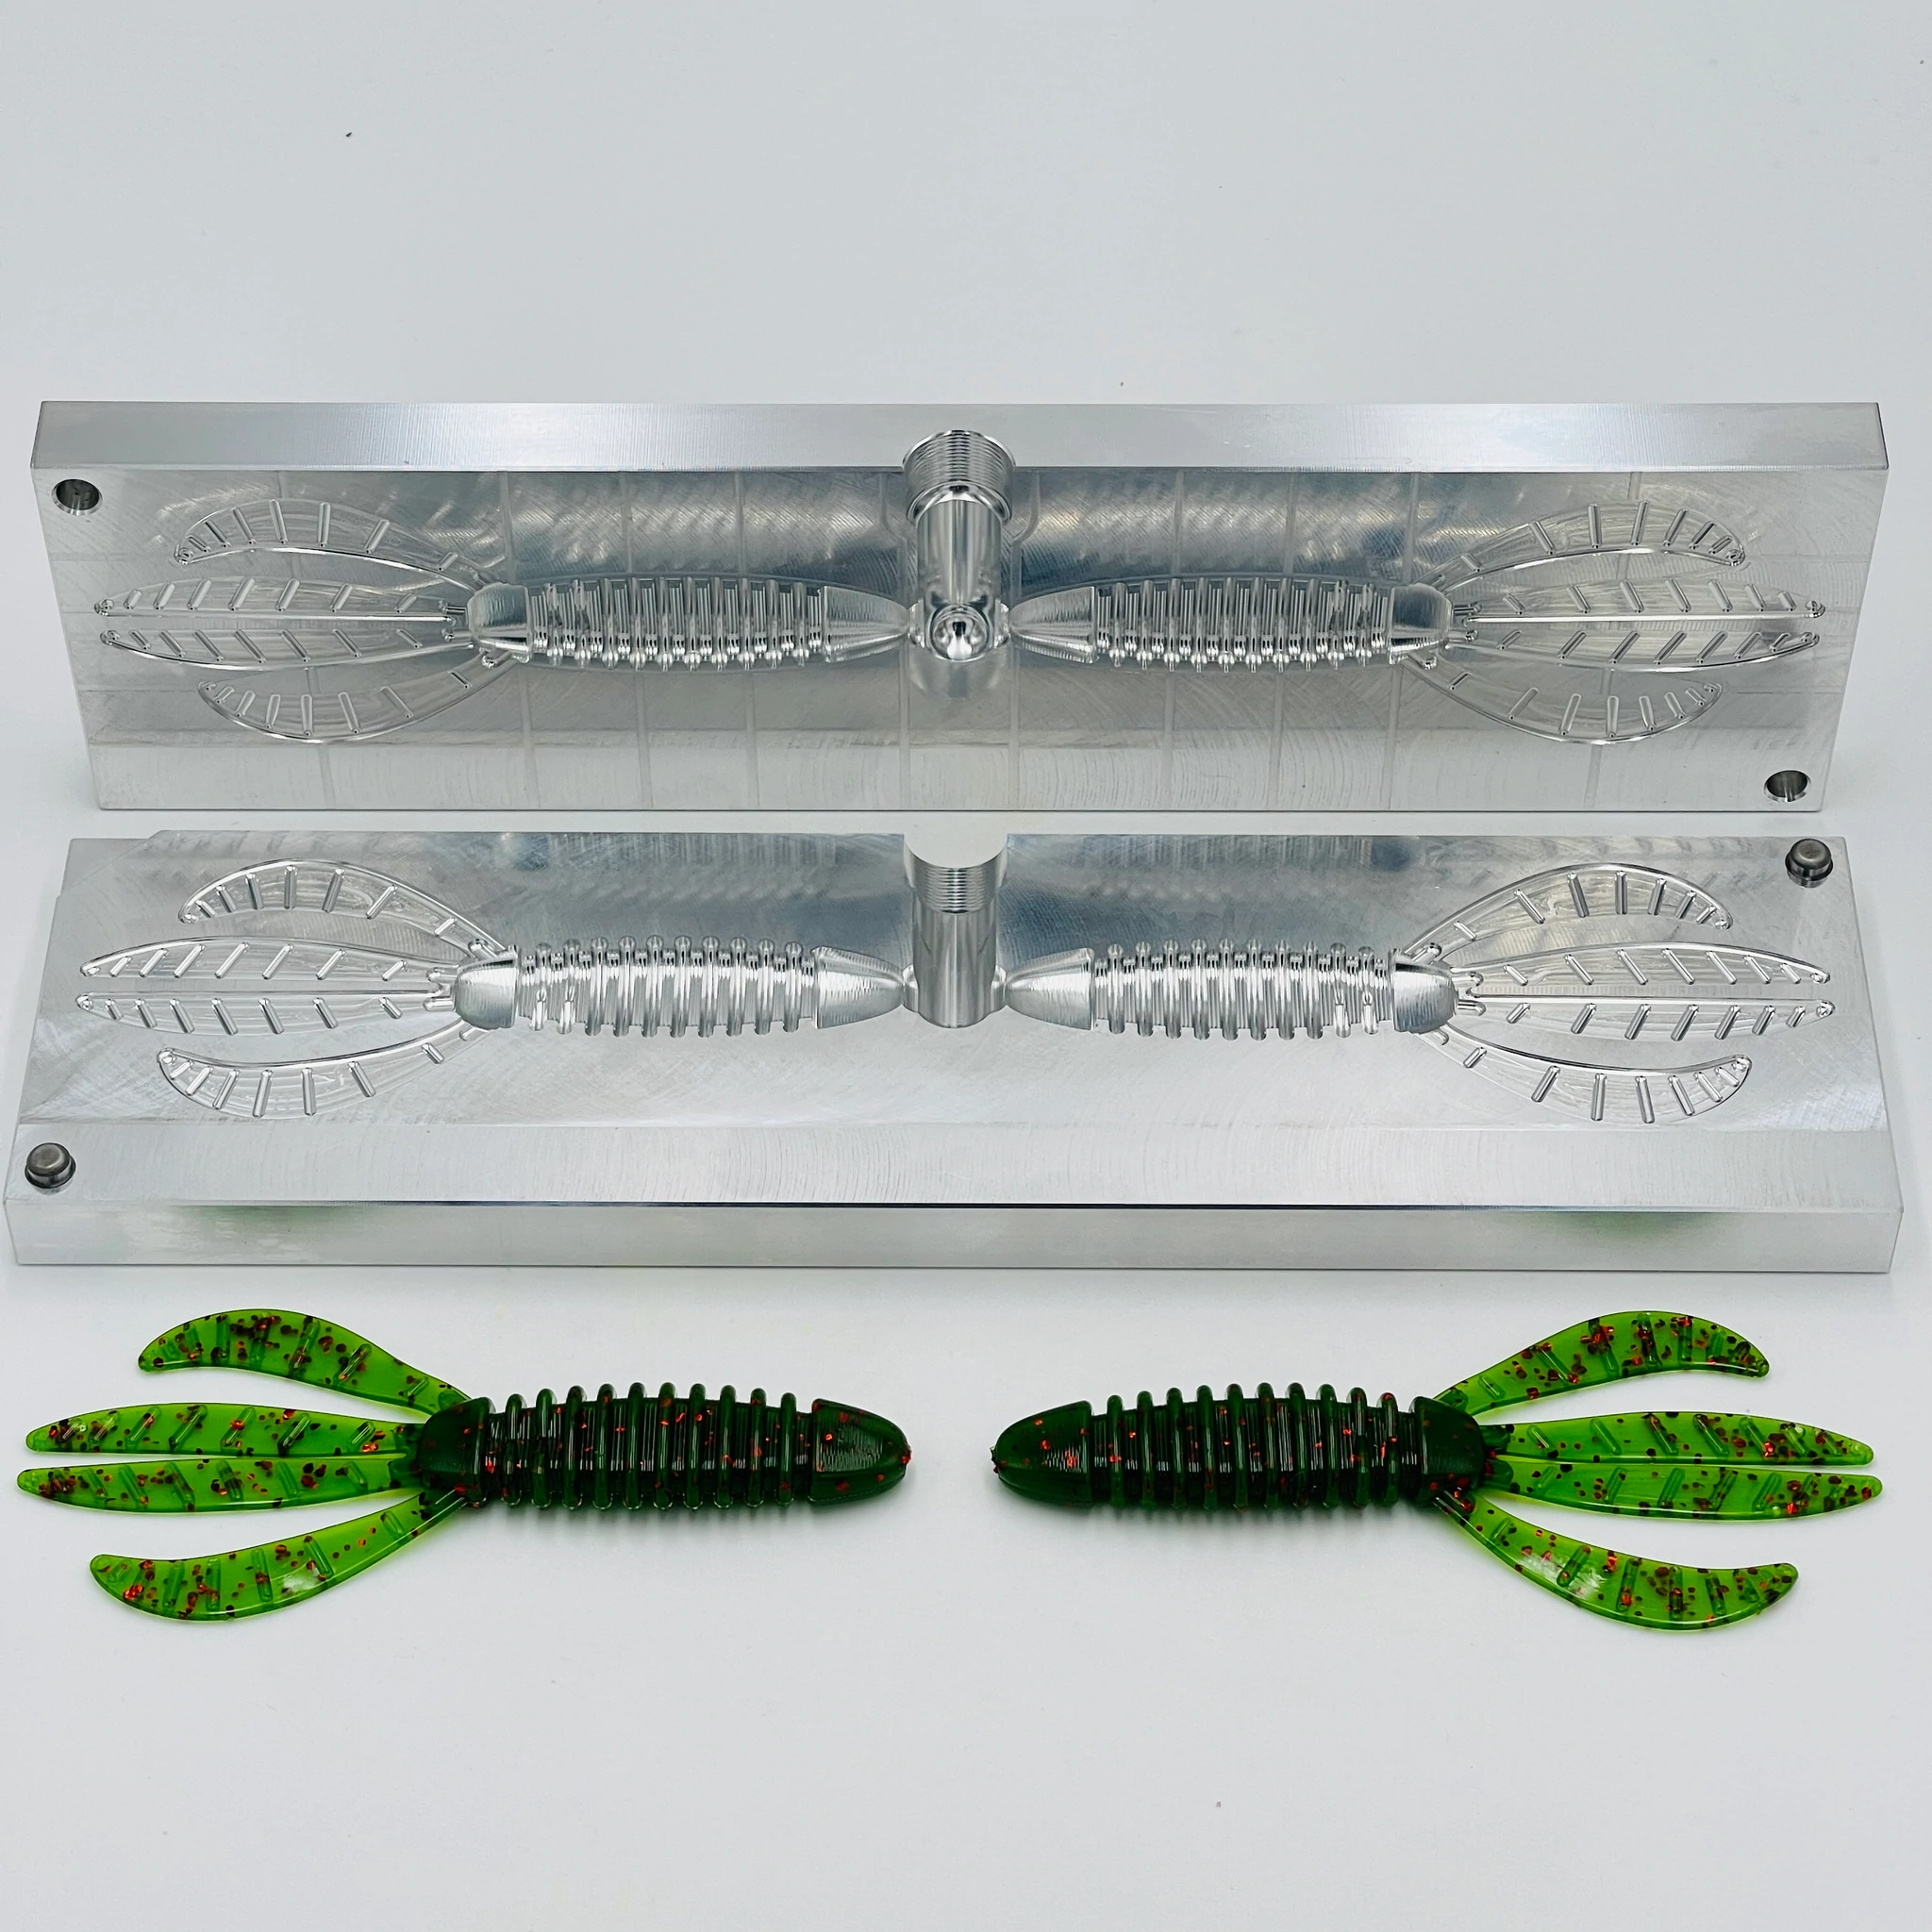 Swimbait fishing lure molds - sporting goods - by owner - sale - craigslist